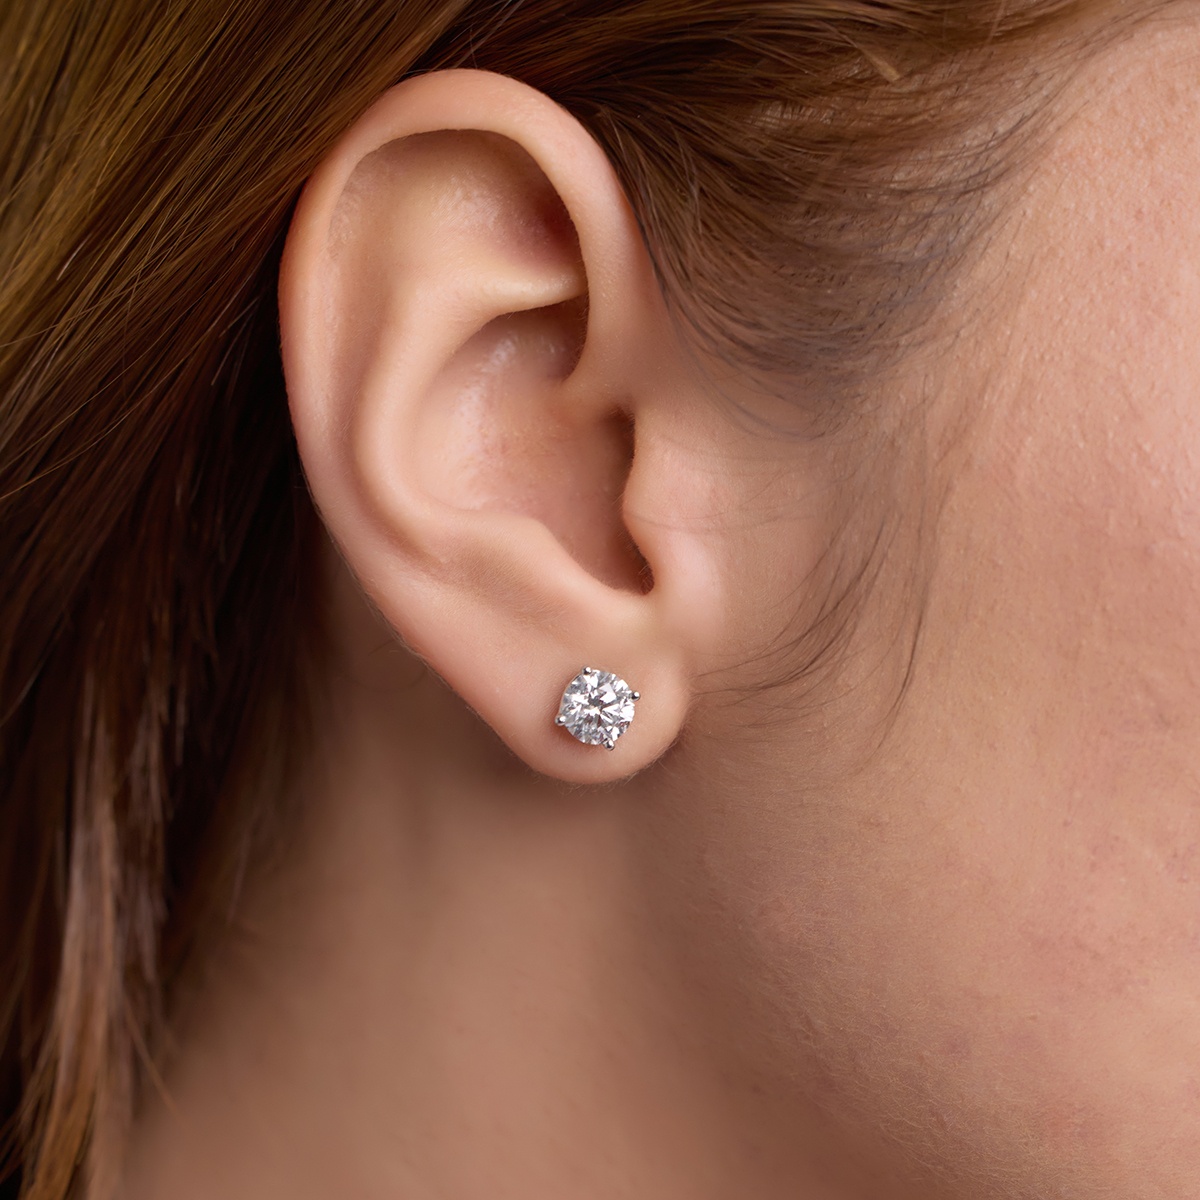 Solid White Gold Diamond Studs, 2 Ct Round Created Pink Diamond Earrin -  Brilliant Lab Creations